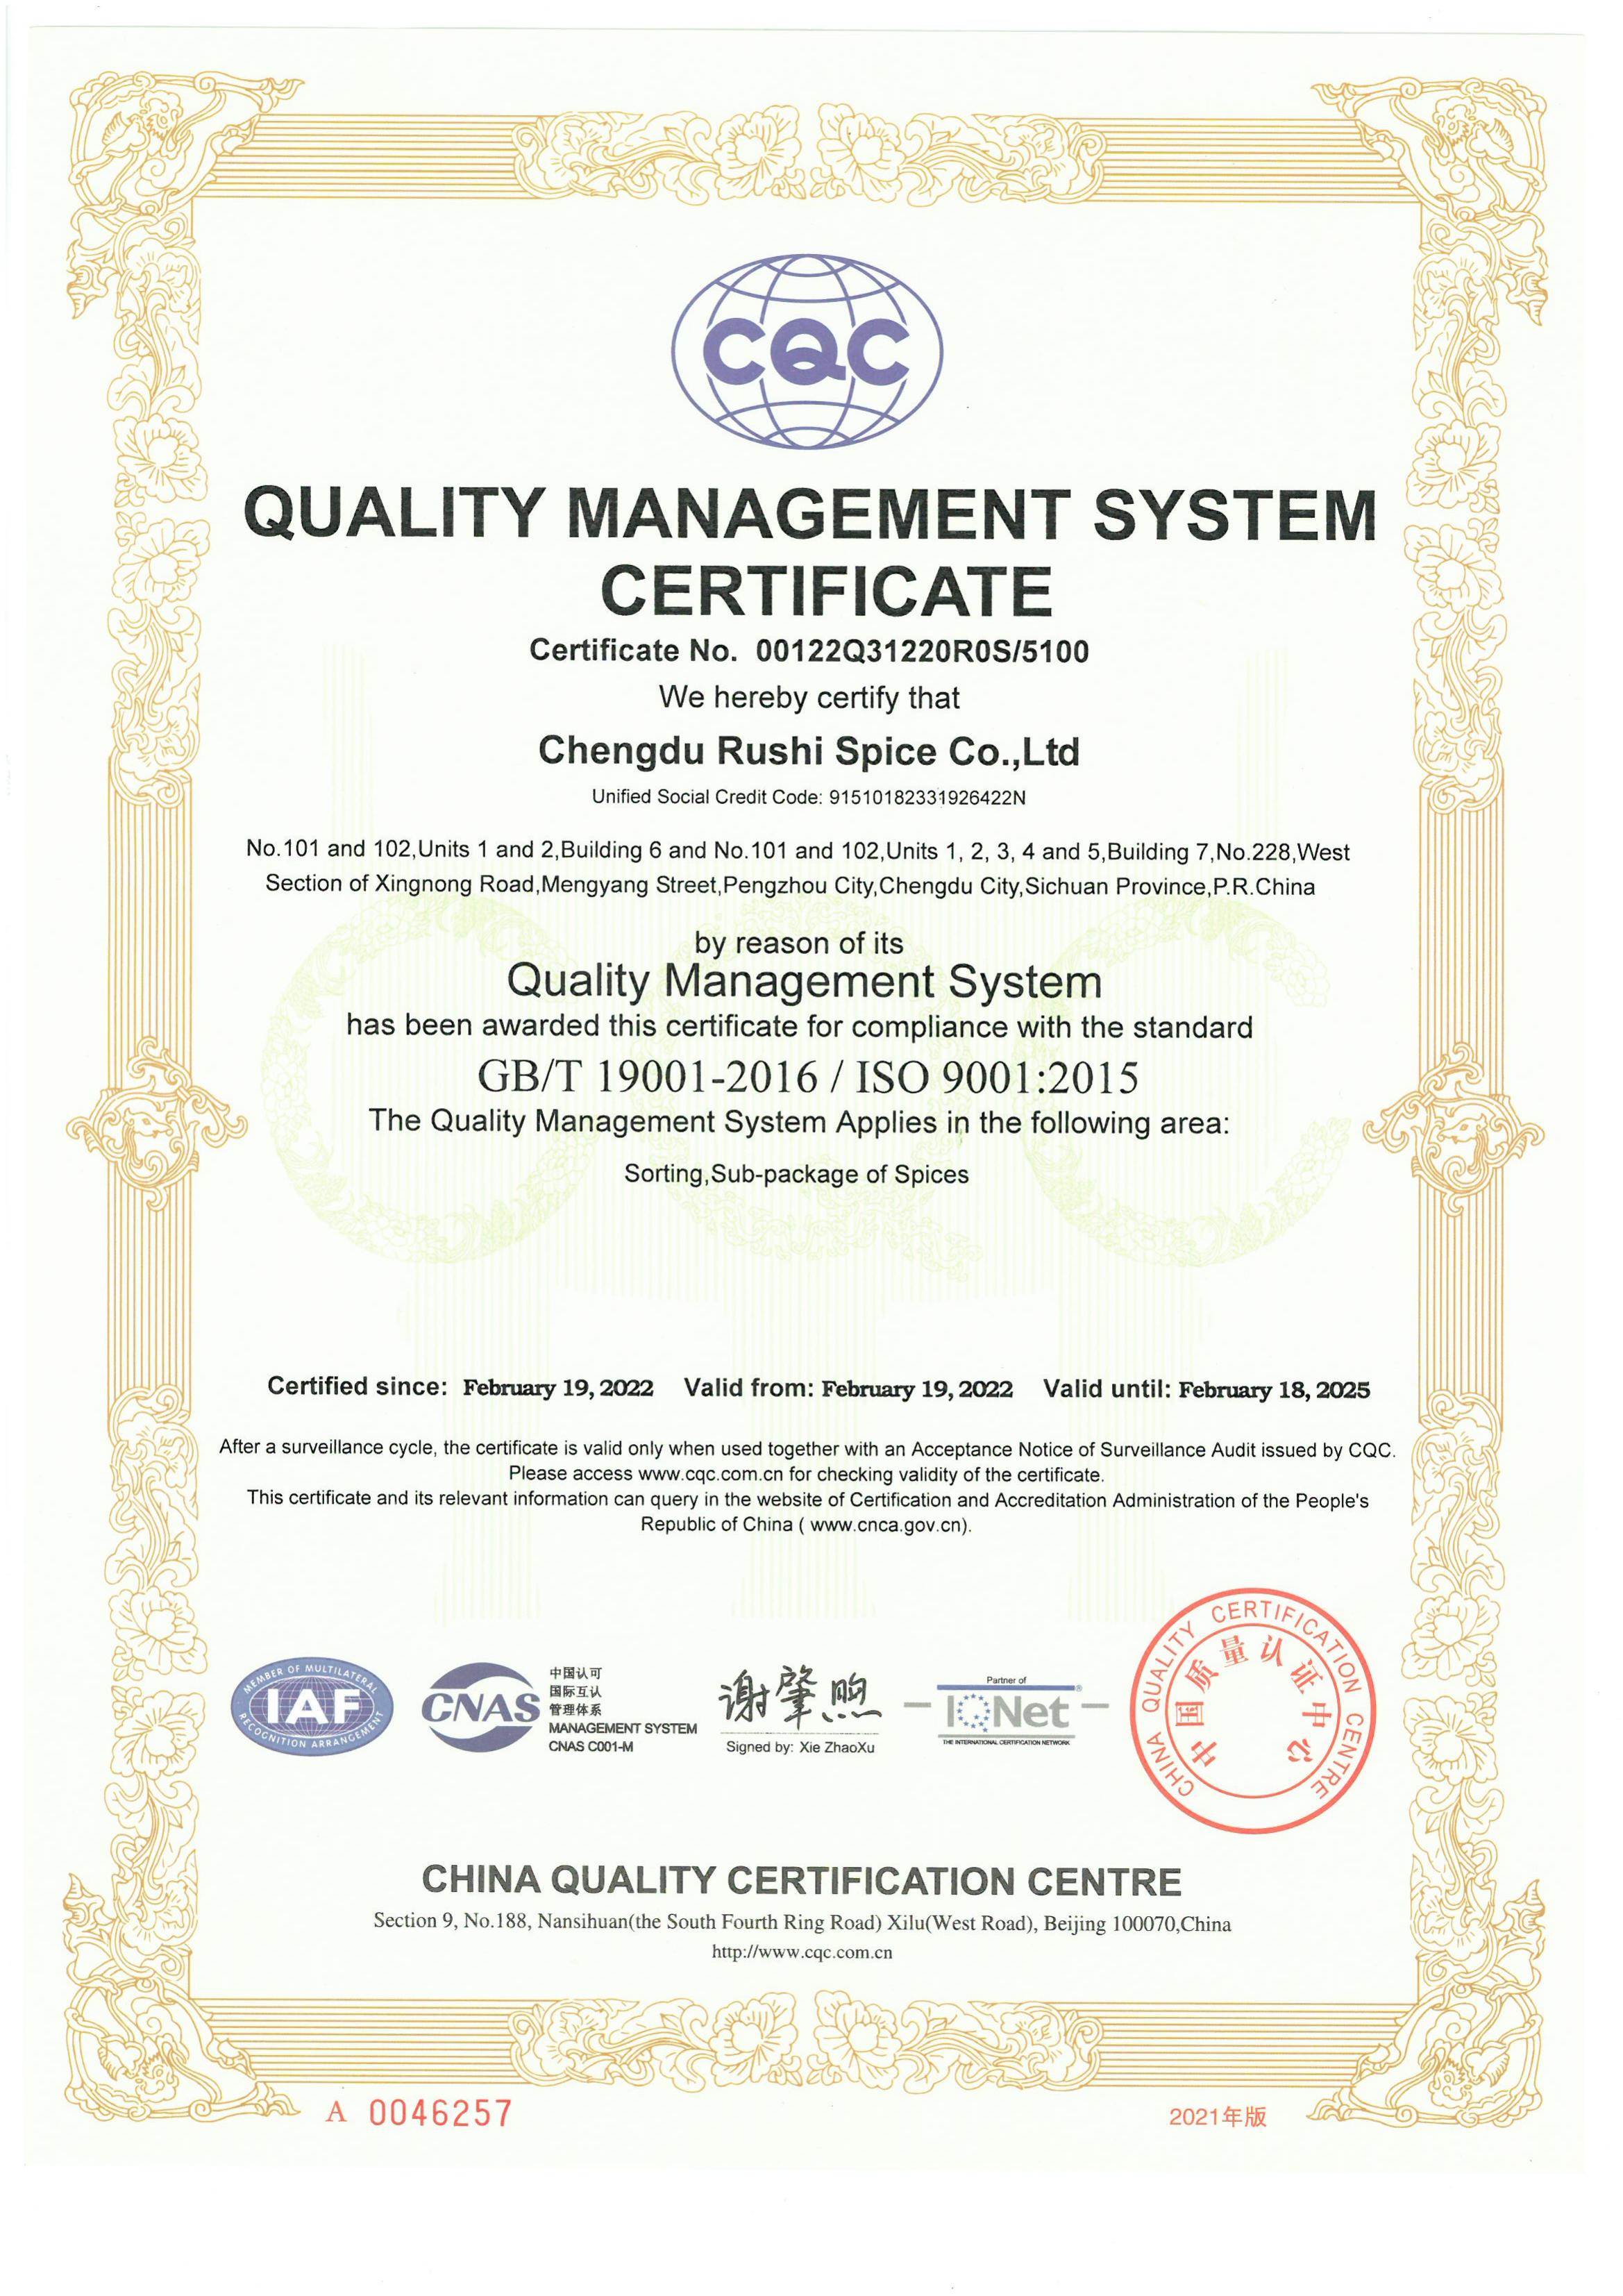 2.ISO9001